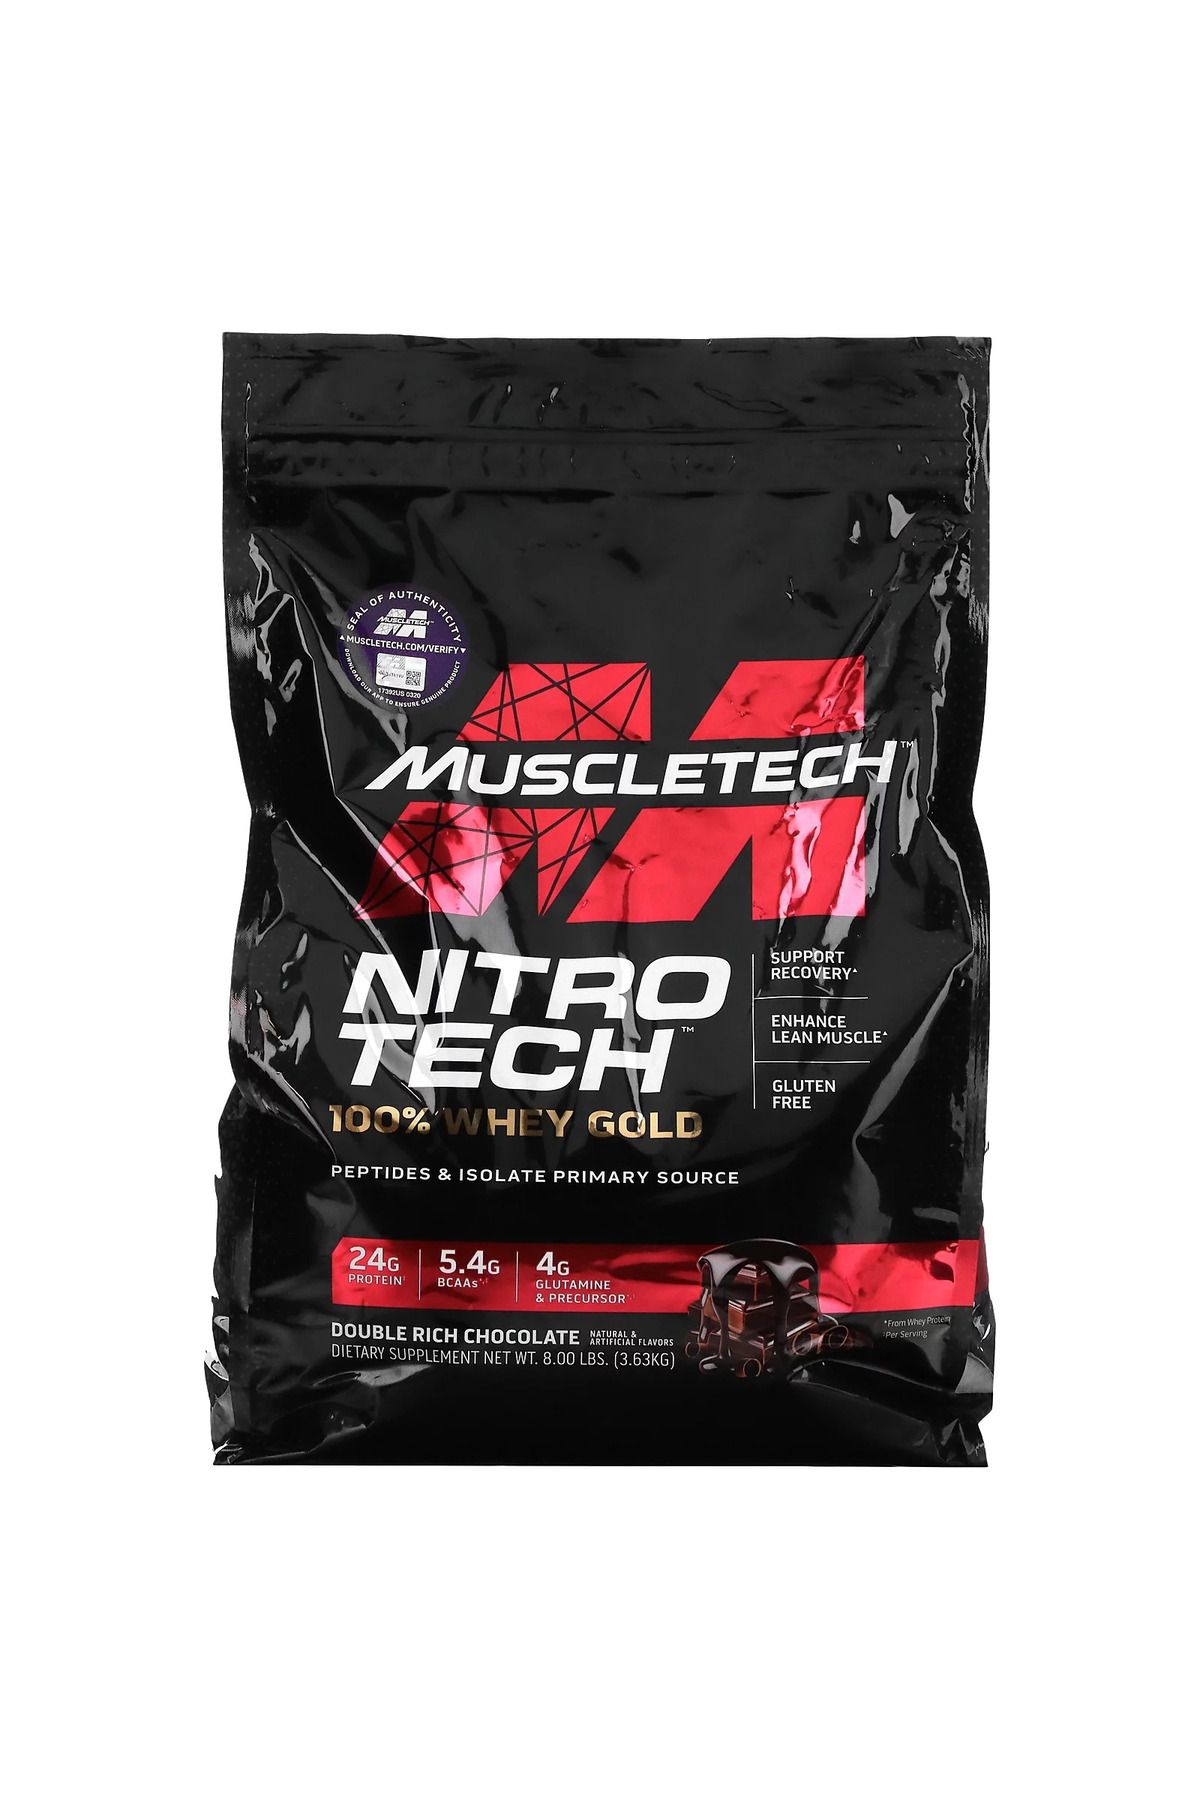 Muscletech Nitro Tech, 100% Whey Gold İsolate Protein Double Rich Chocolate, 8 lbs (3.63 kg)